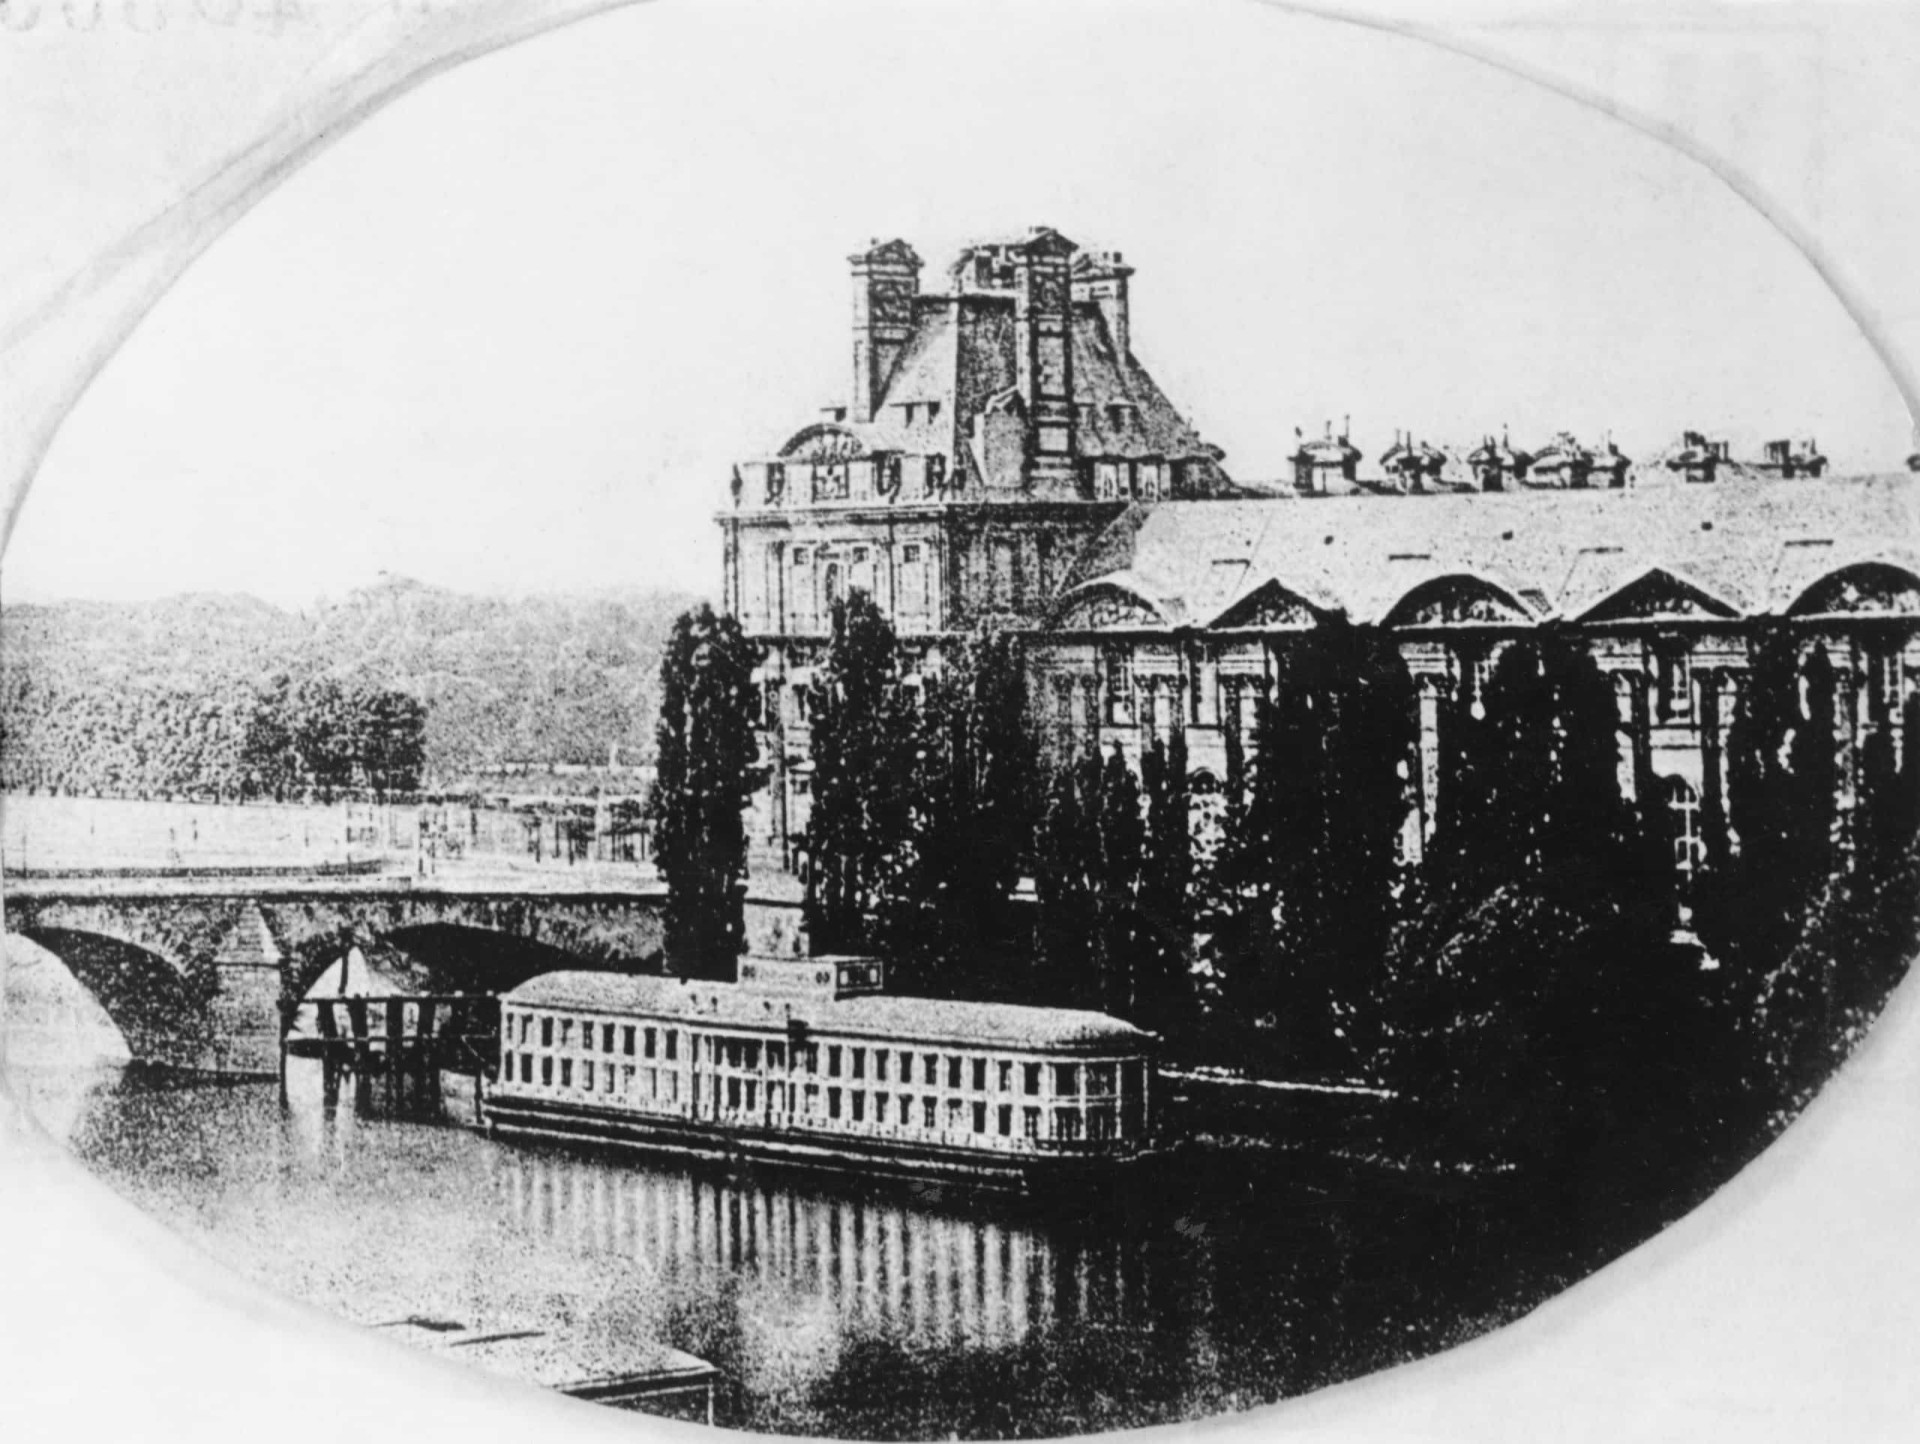 Here's a view of the Tuileries Palace taken back in 1839. The historical building was a casualty of an insurrection in 1871 and burned down. Its stone structure continued to stay in place, until when in 1879 the local government decided to have it demolished (a task completed in 1883).<p>You may also like:<a href="https://www.starsinsider.com/n/221847?utm_source=msn.com&utm_medium=display&utm_campaign=referral_description&utm_content=397441v1en-en"> The Last Supper: famous final feasts</a></p>